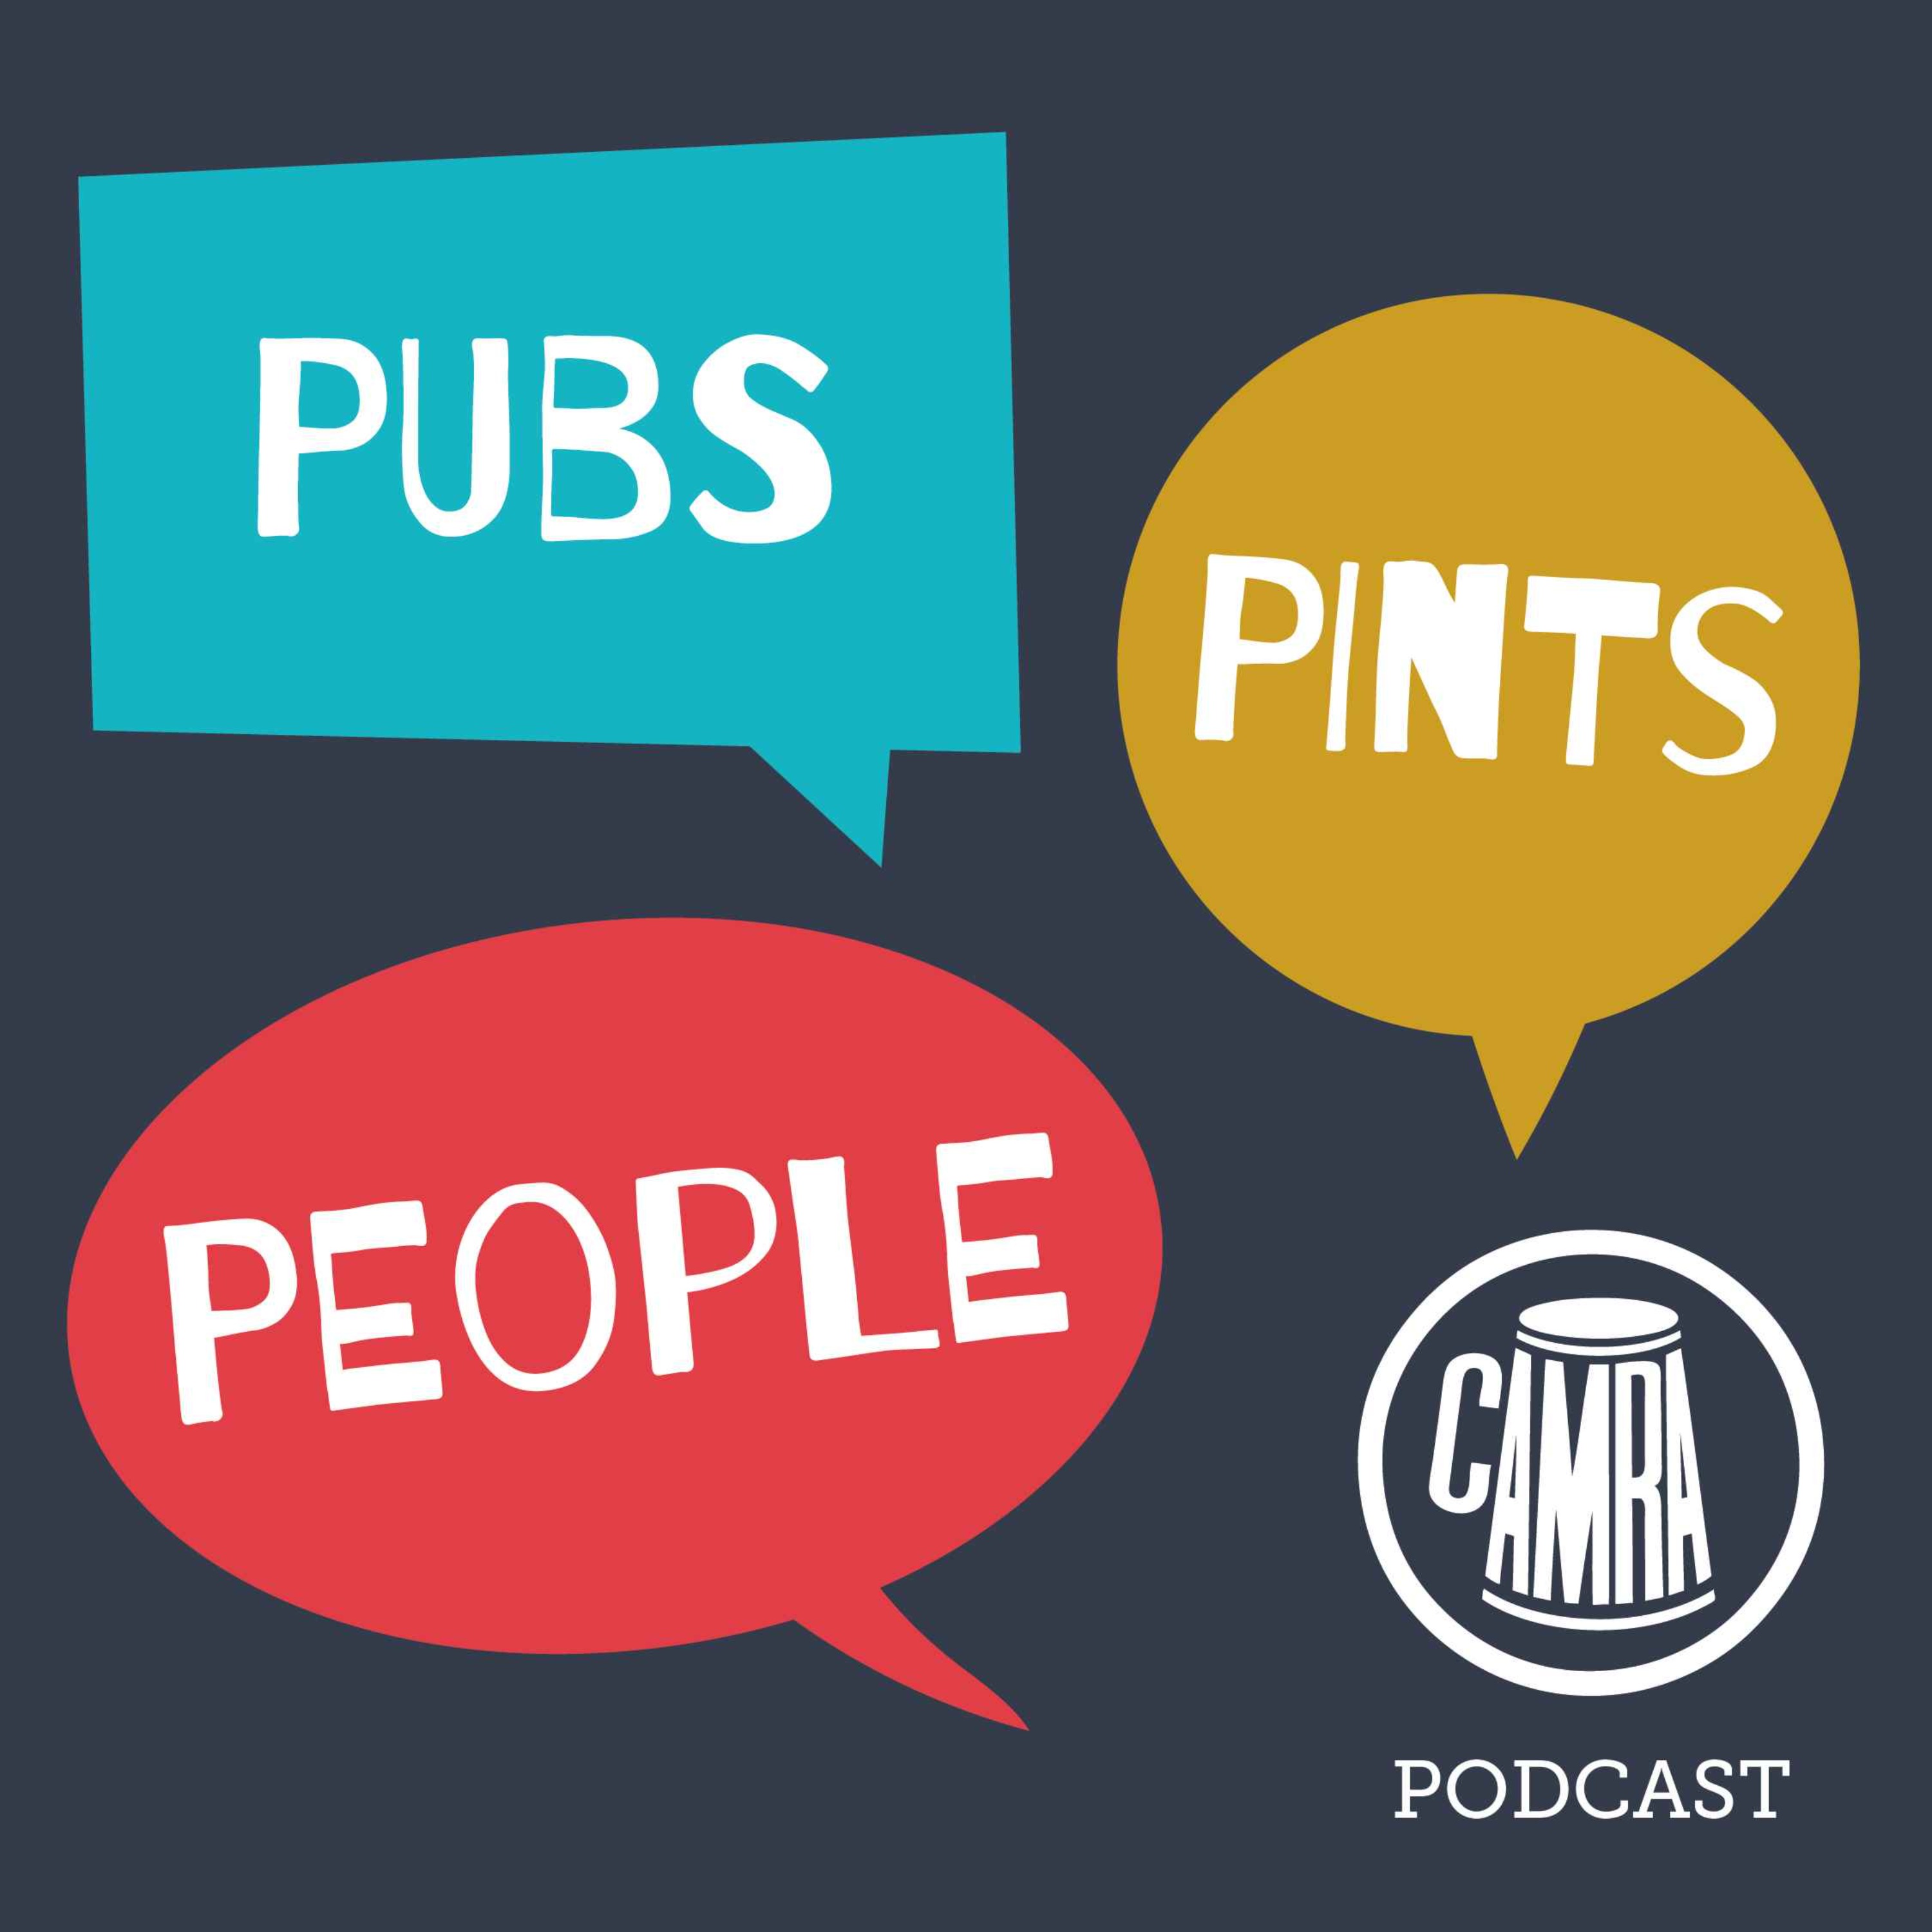 Pubs, Pints and People: CAMRA podcast